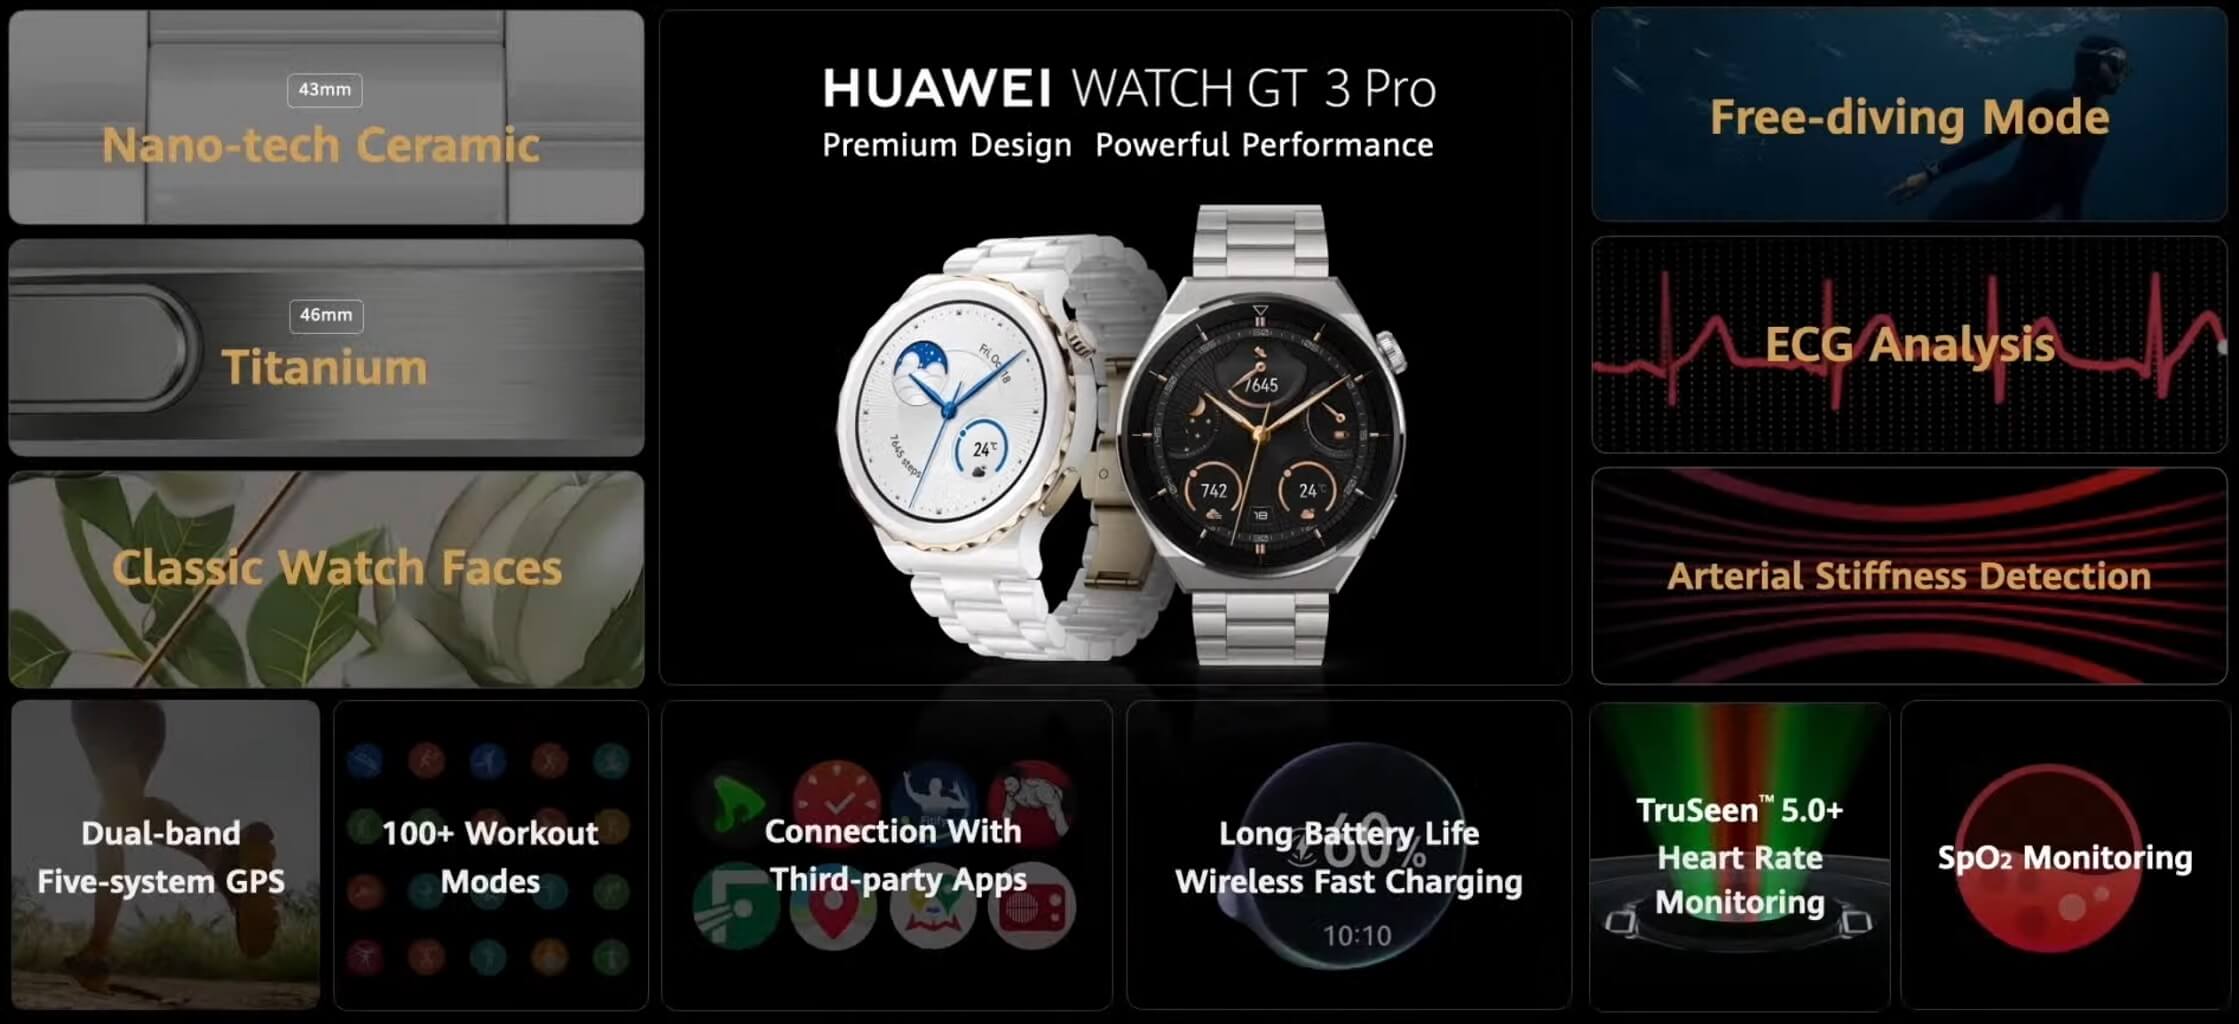 Huawei Watch GT 3 Pro features global